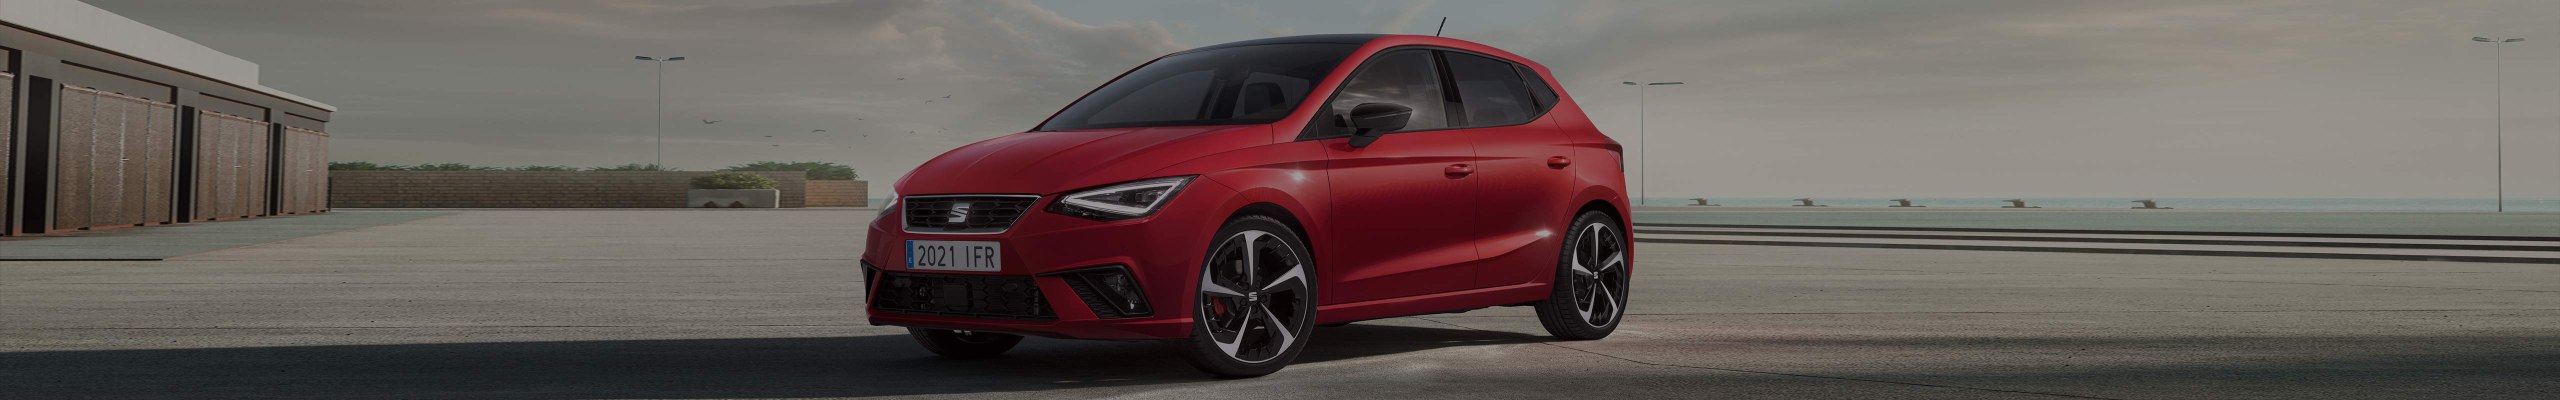 The new SEAT Ibiza is here.